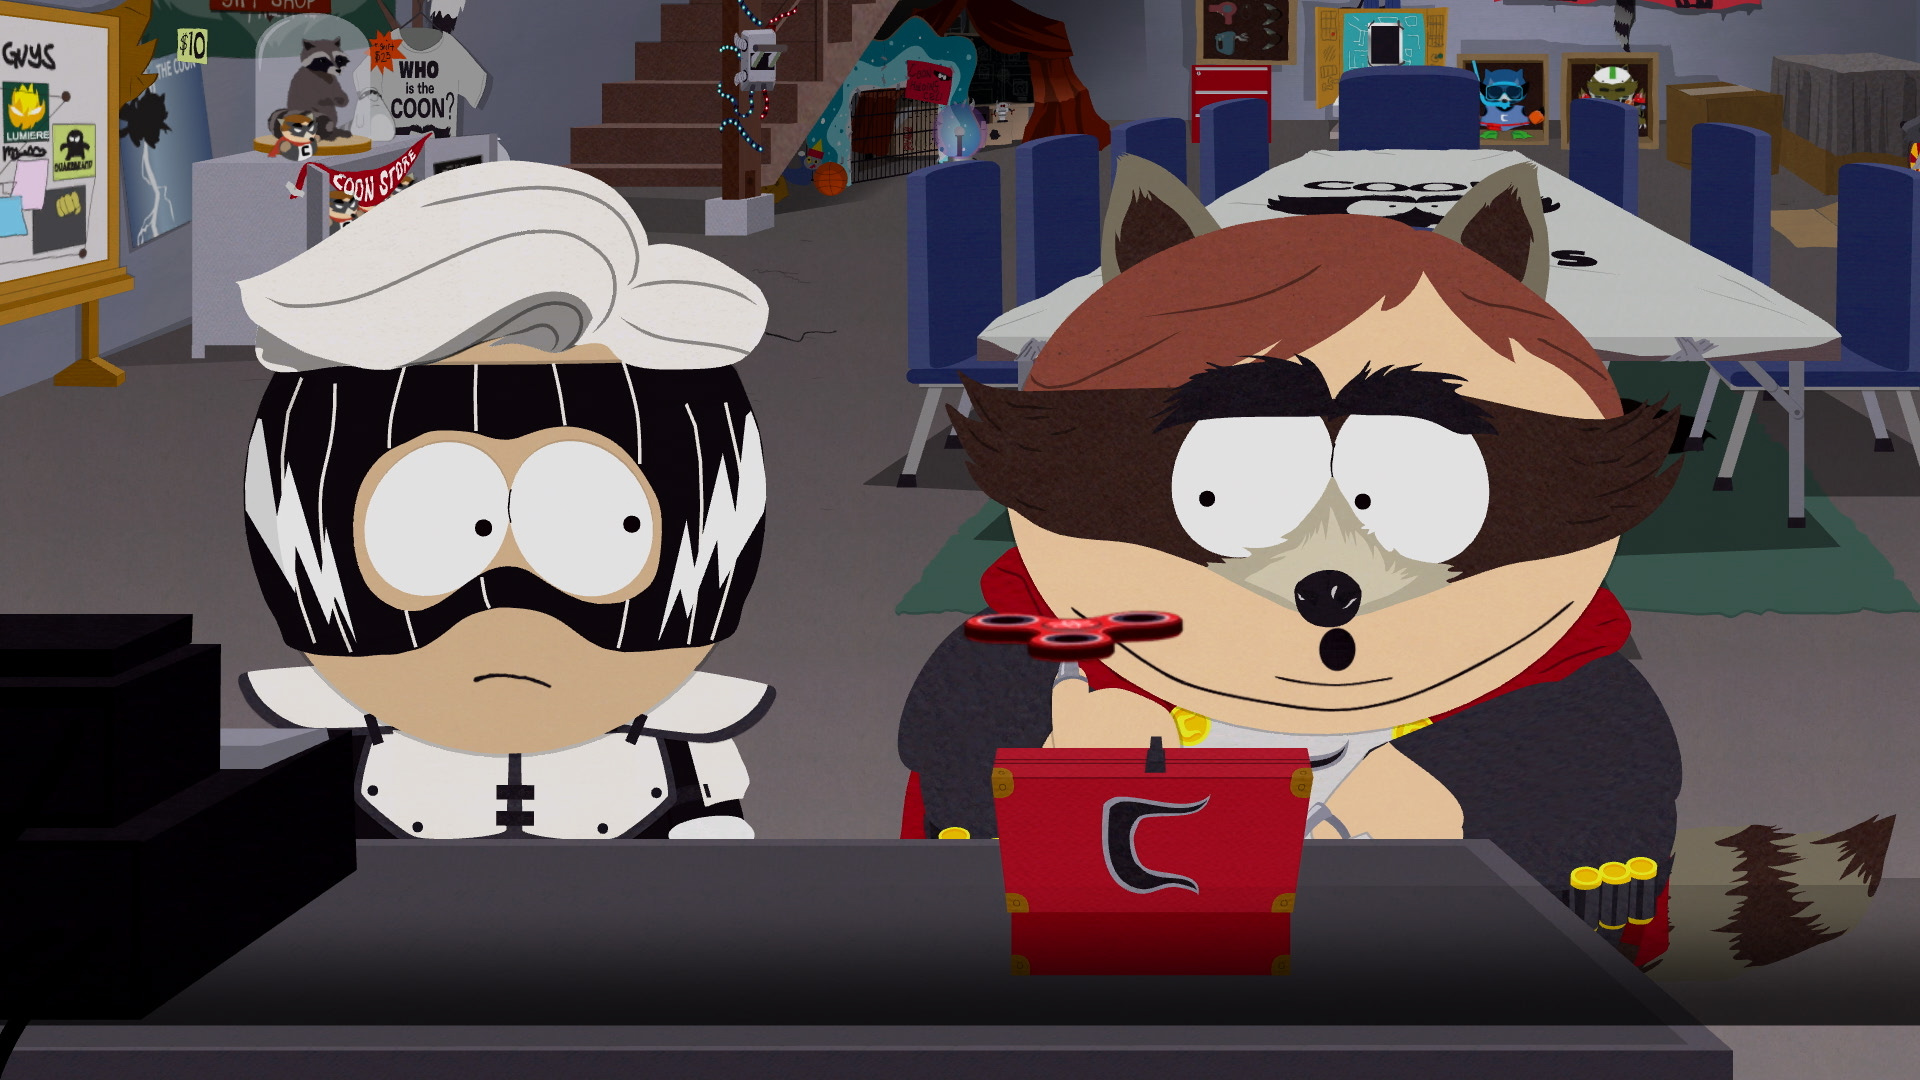 ‘South Park: The Fractured But Whole’ review